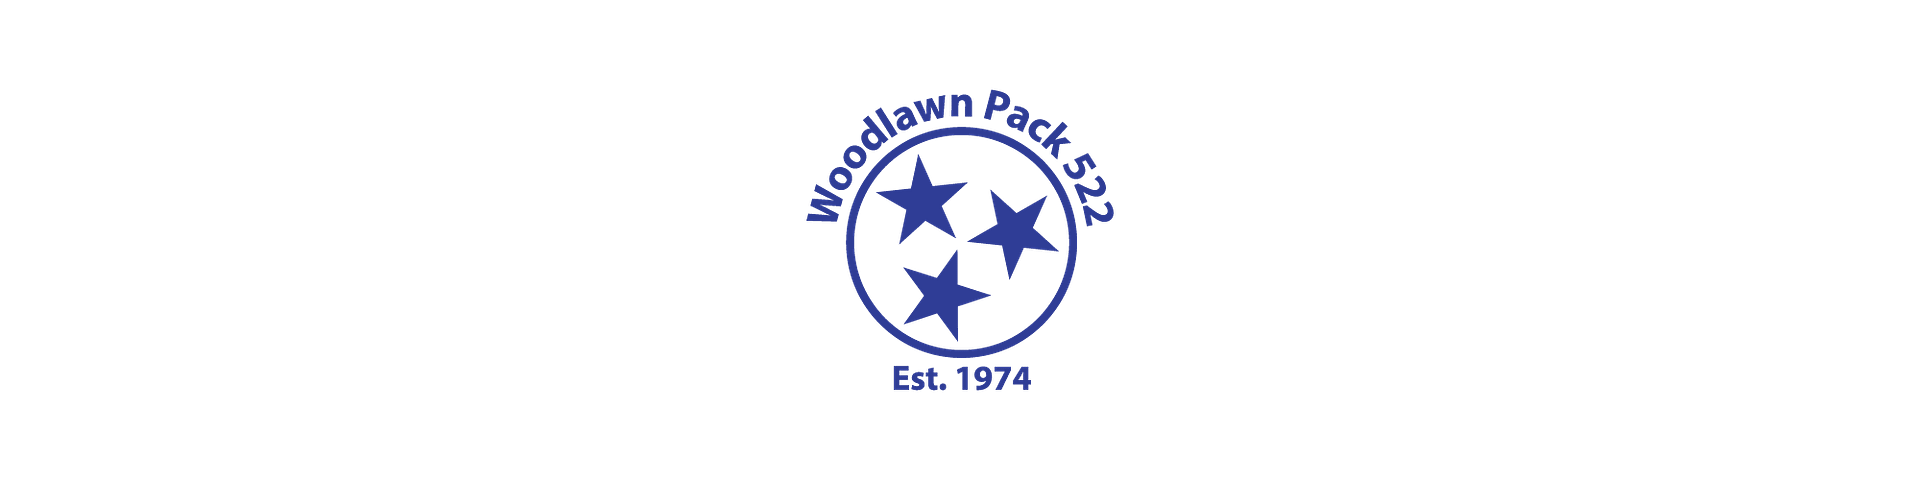 Woodlawn Pack 522